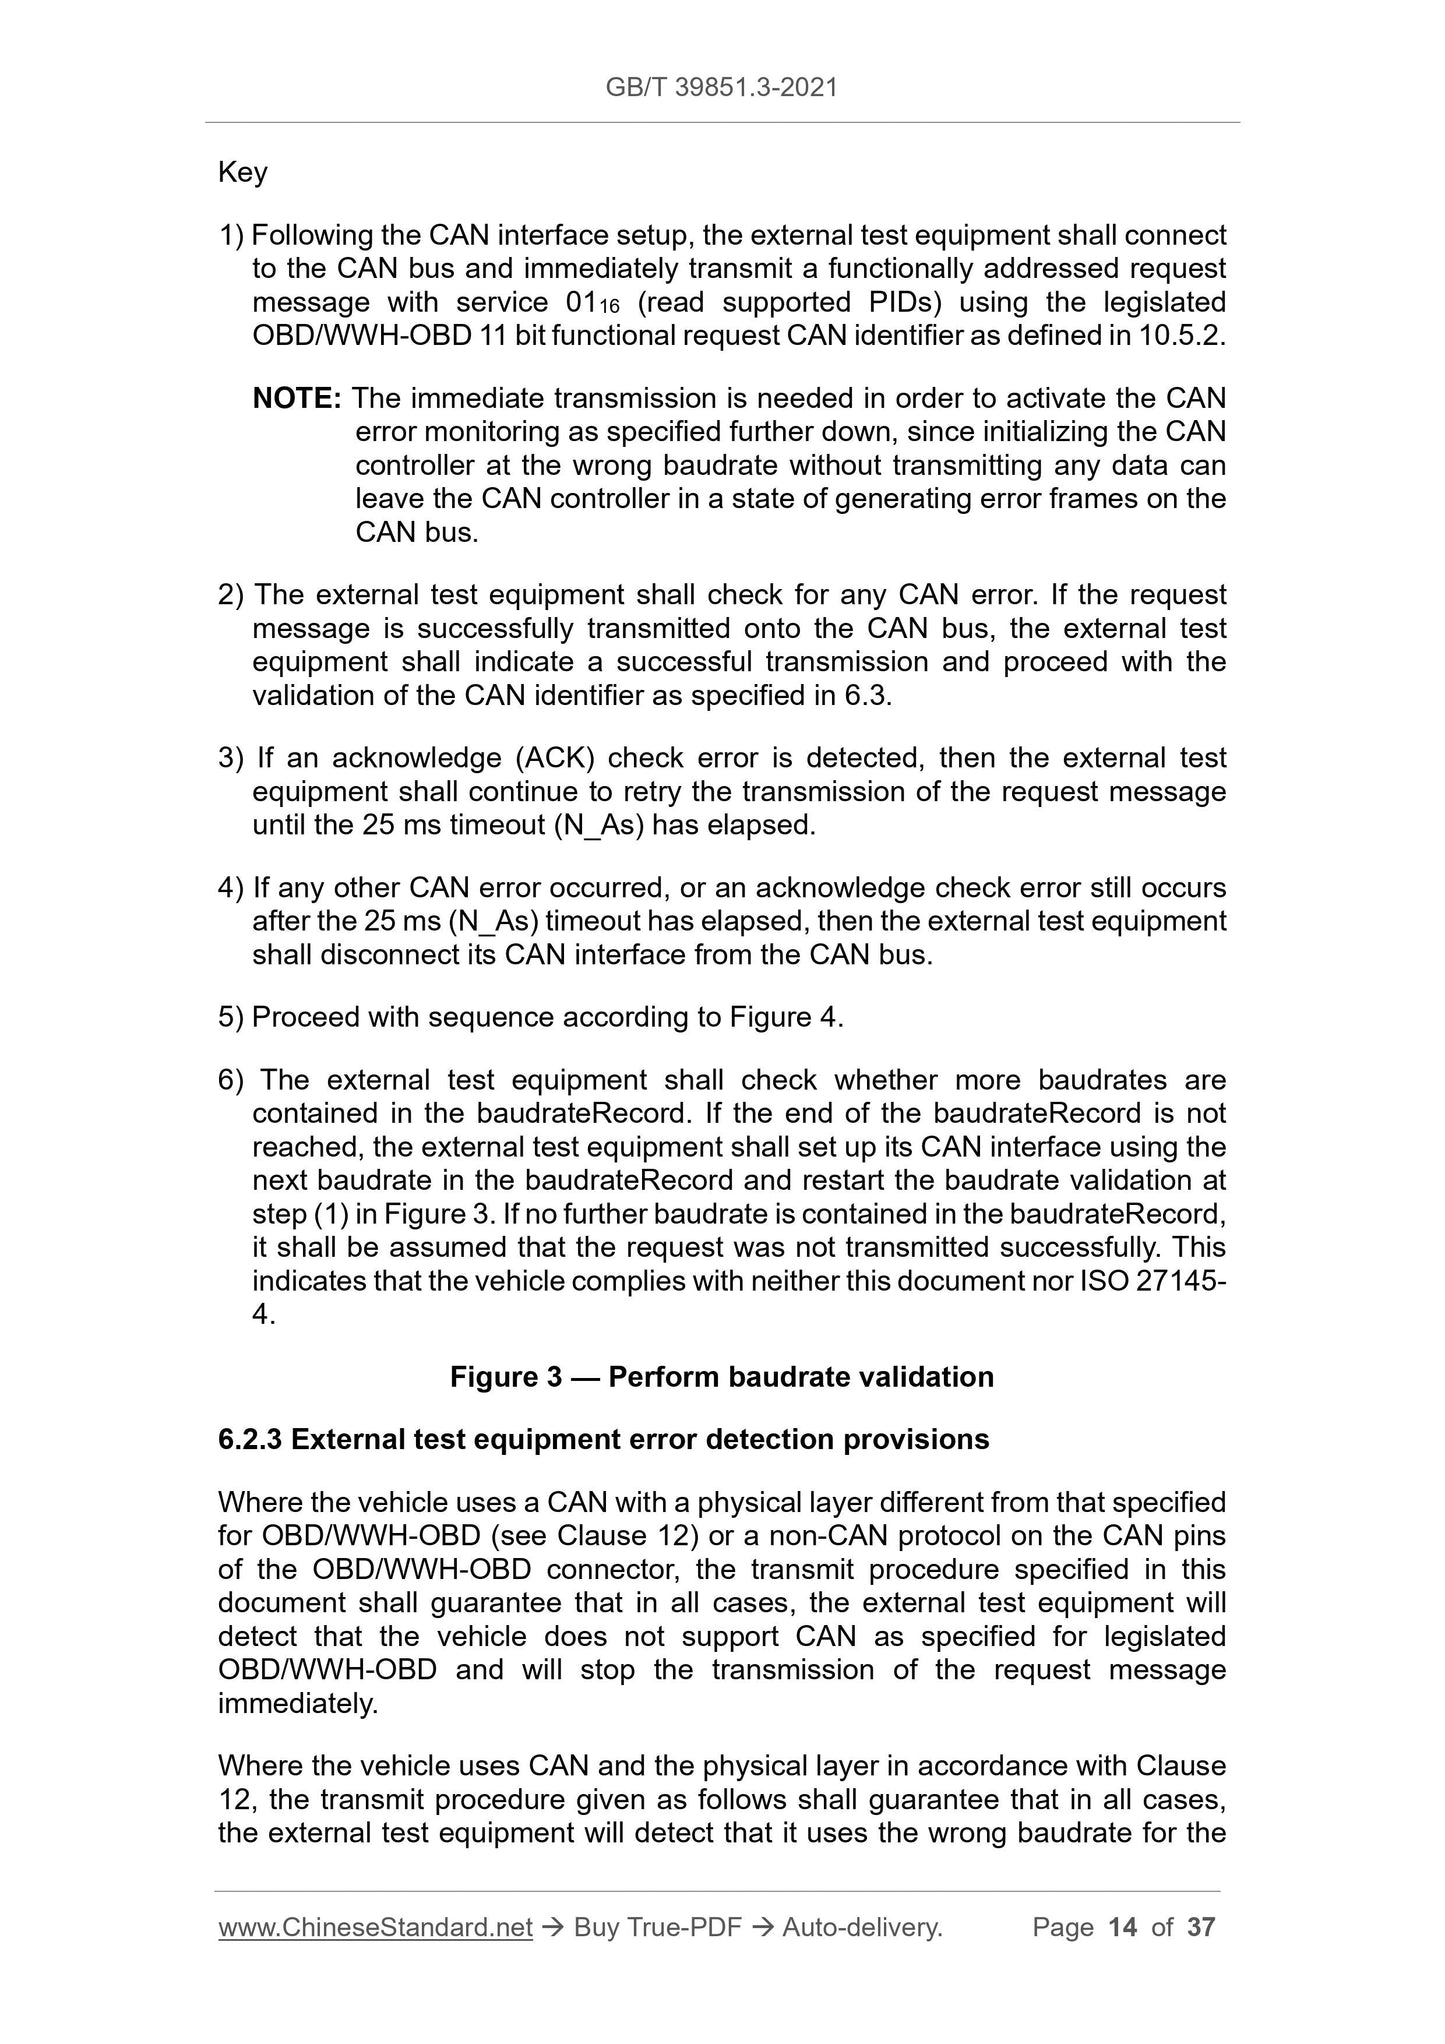 GB/T 39851.3-2021 Page 5